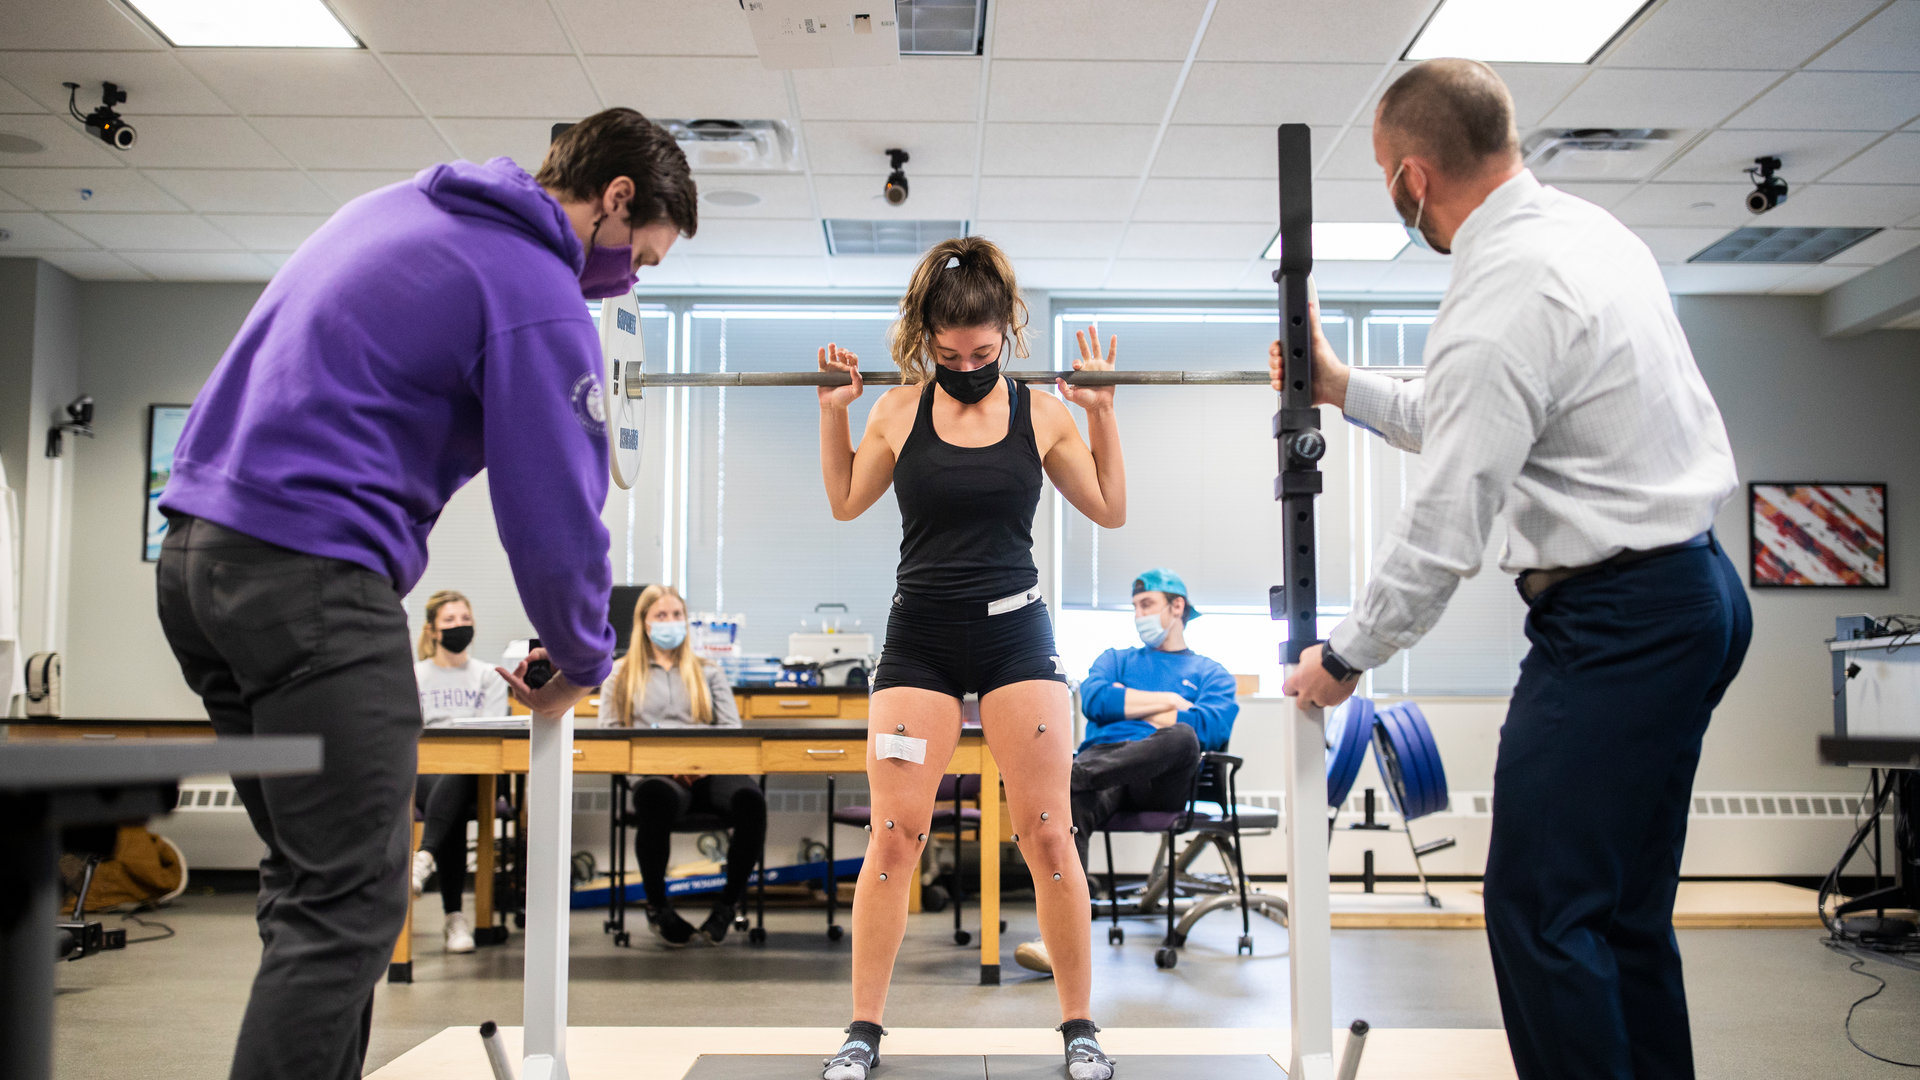 Professor and student observe another student wearing biometric sensors while doing squats.